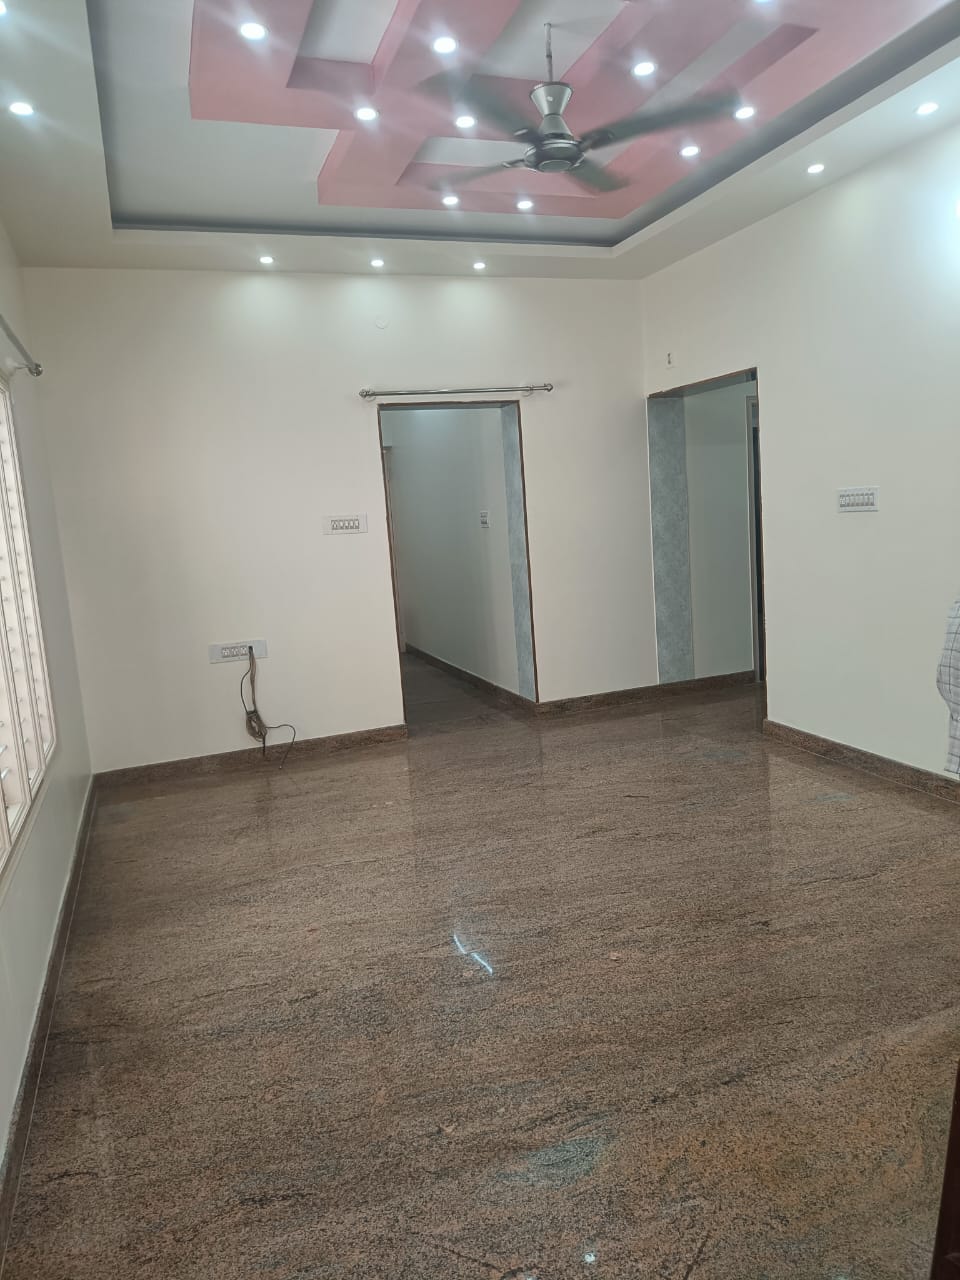 2 BHK Independent House for Lease Only at JAML2 - 3102 in Tejaswini Nagar